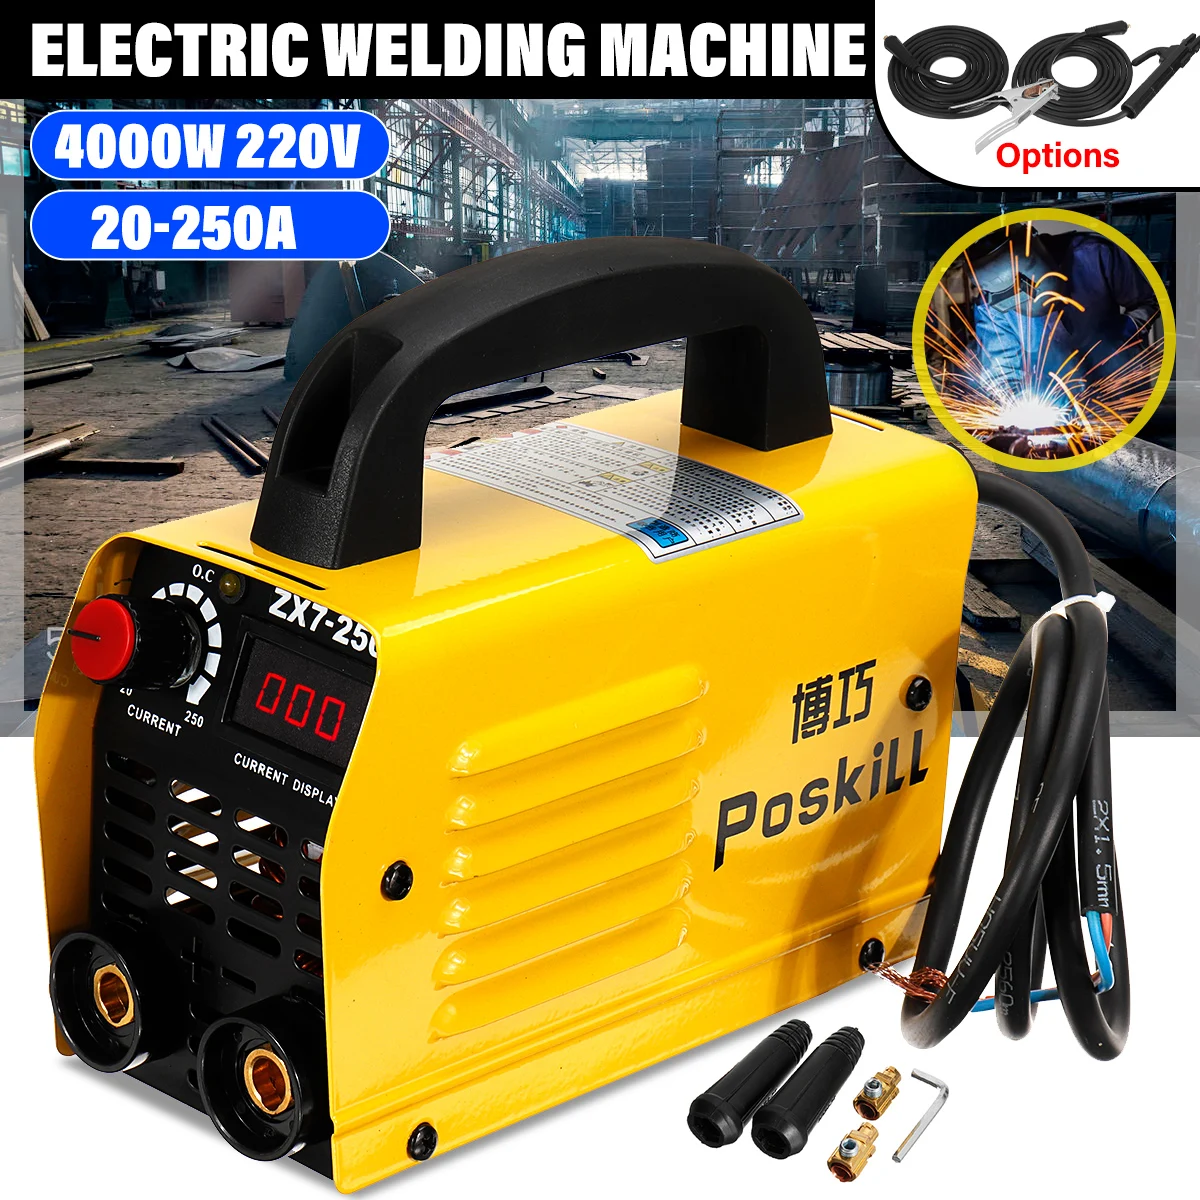 

ZX7-250 4KW Portable Inverter Arc Electric Mini Welding Machine 20A-250A LCD Adjustable MMA Welder Welding Working 3M Cable 220V